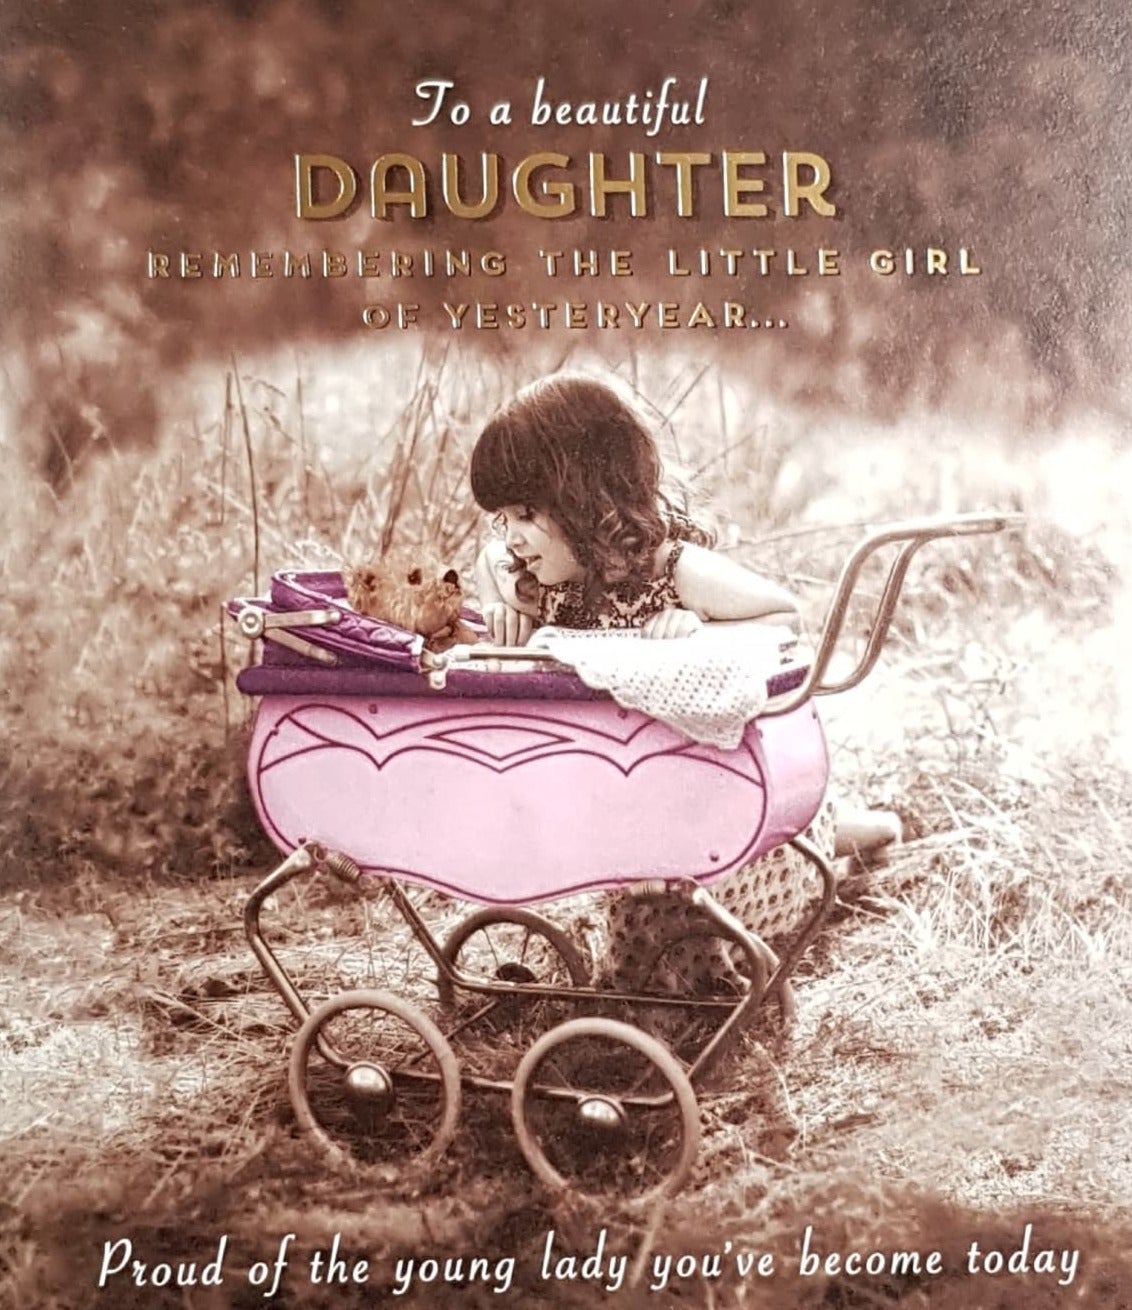 Birthday Card - Daughter / A Little Girl With A Teddy In A Pink Pram